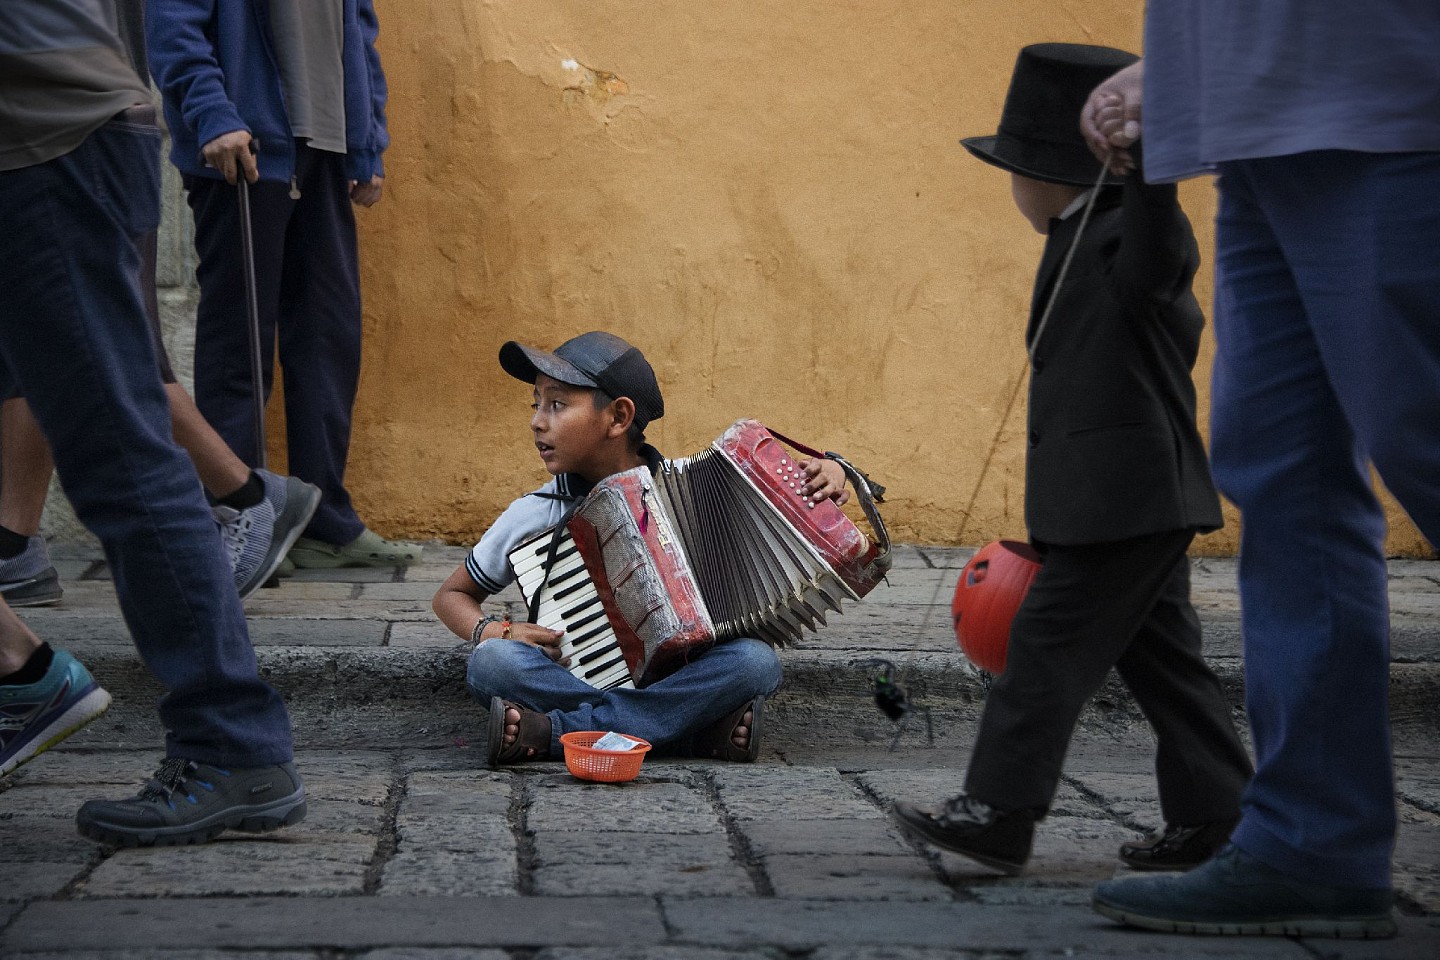 Steve McCurry, Boy Plays Accordion, 2018
FujiFlex Crystal Archive Print
Price/Size on request